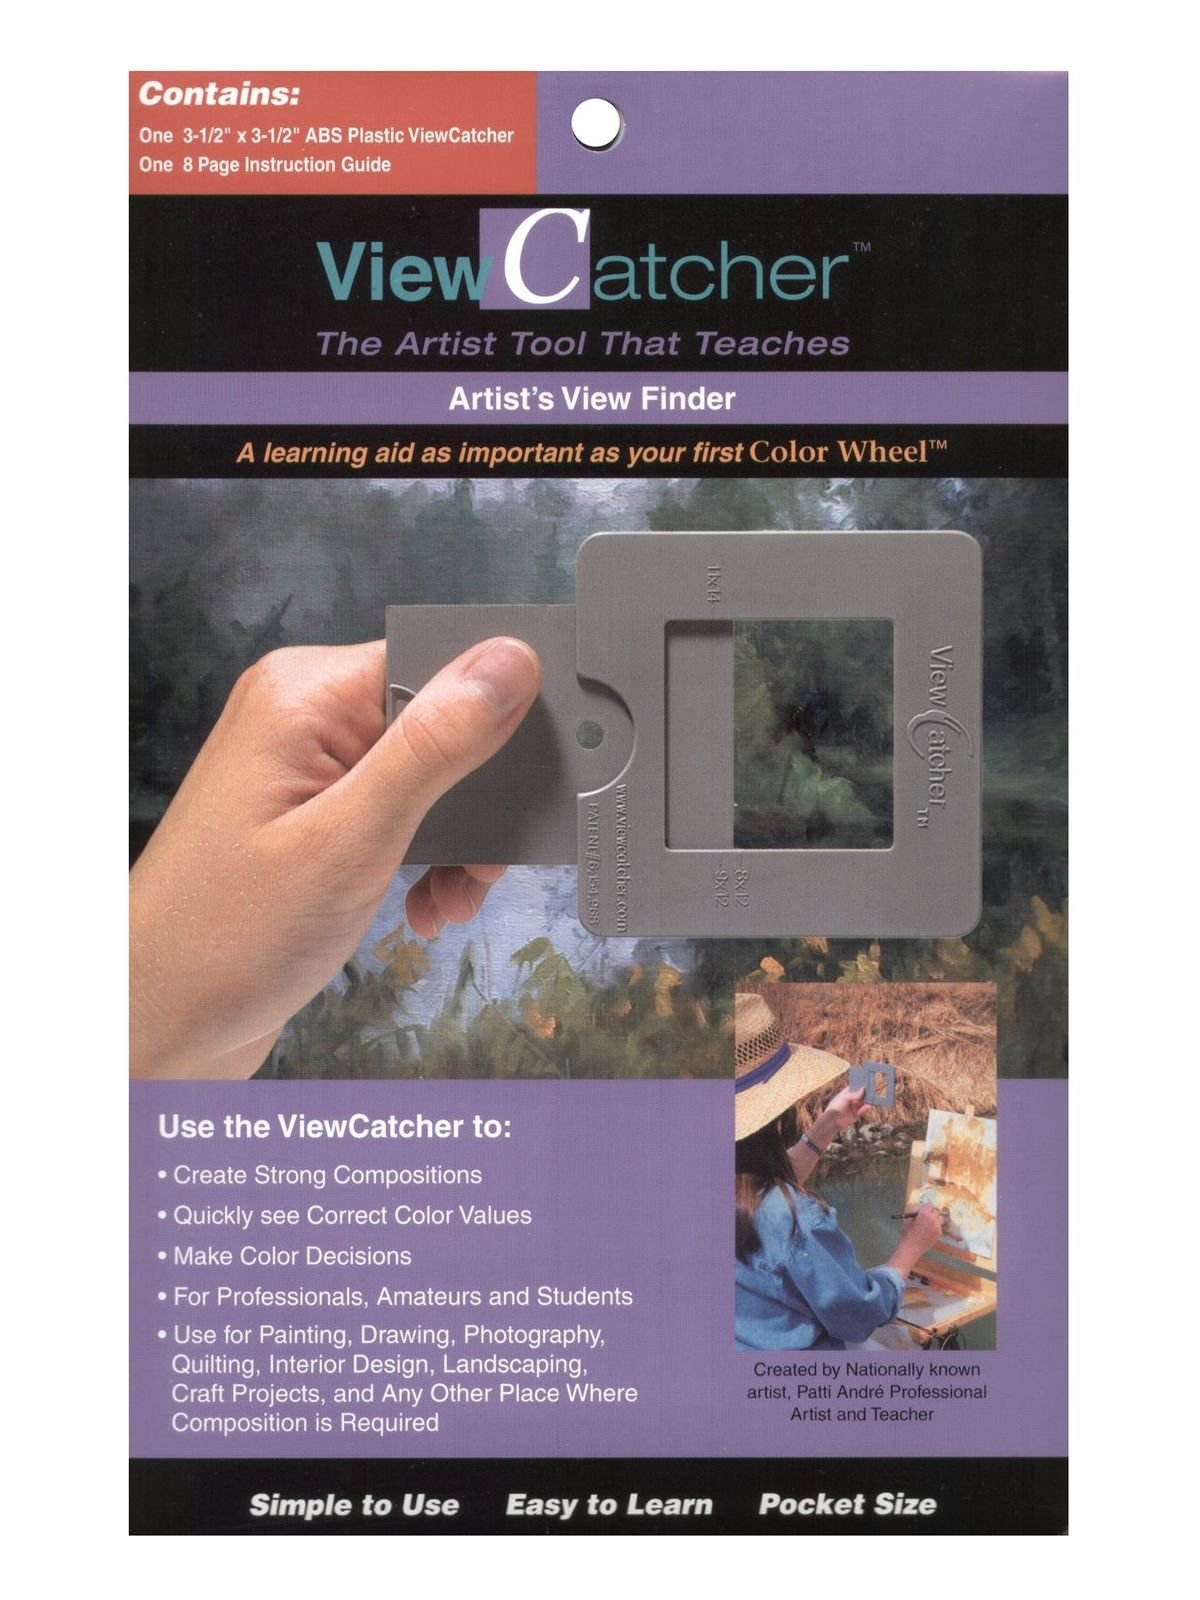 The Color Wheel Company - ViewCatcher Artist's View Finder